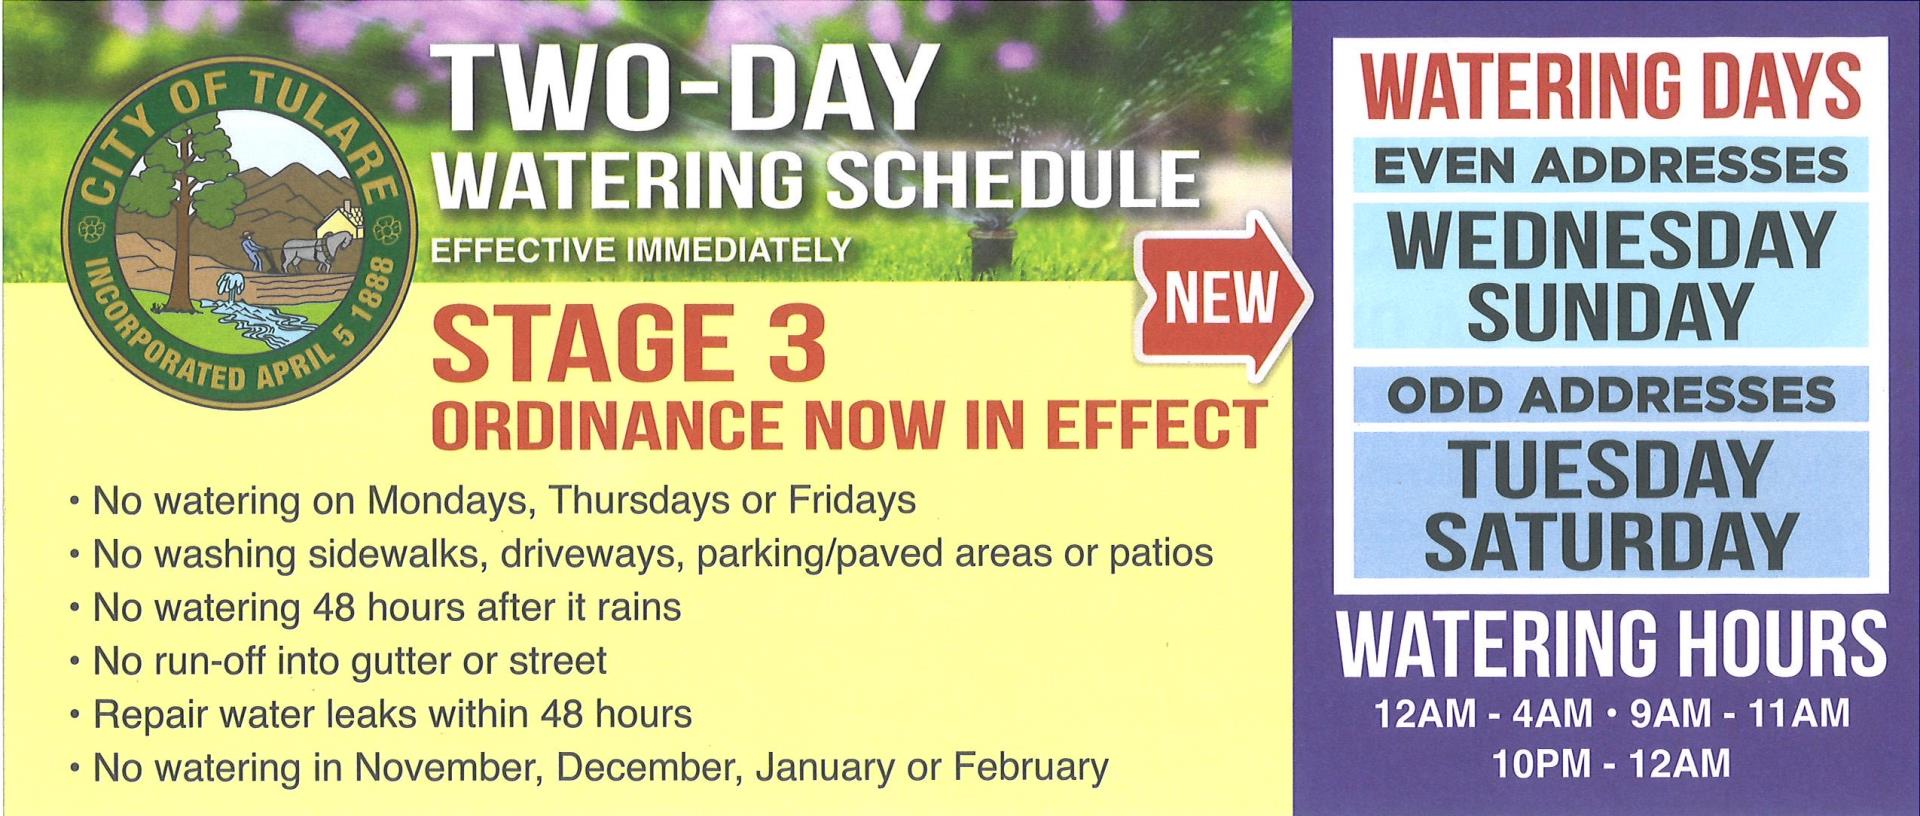 City of Tulare logo, two-day watering schedule effective immediately, stage 3 ordinance now in effect, NEW: Watering days even addresses: wednesday/sunday Odd addresses: Tuesday/saturday watering hours 12am-4am, 9am-11am, 10pm-12am